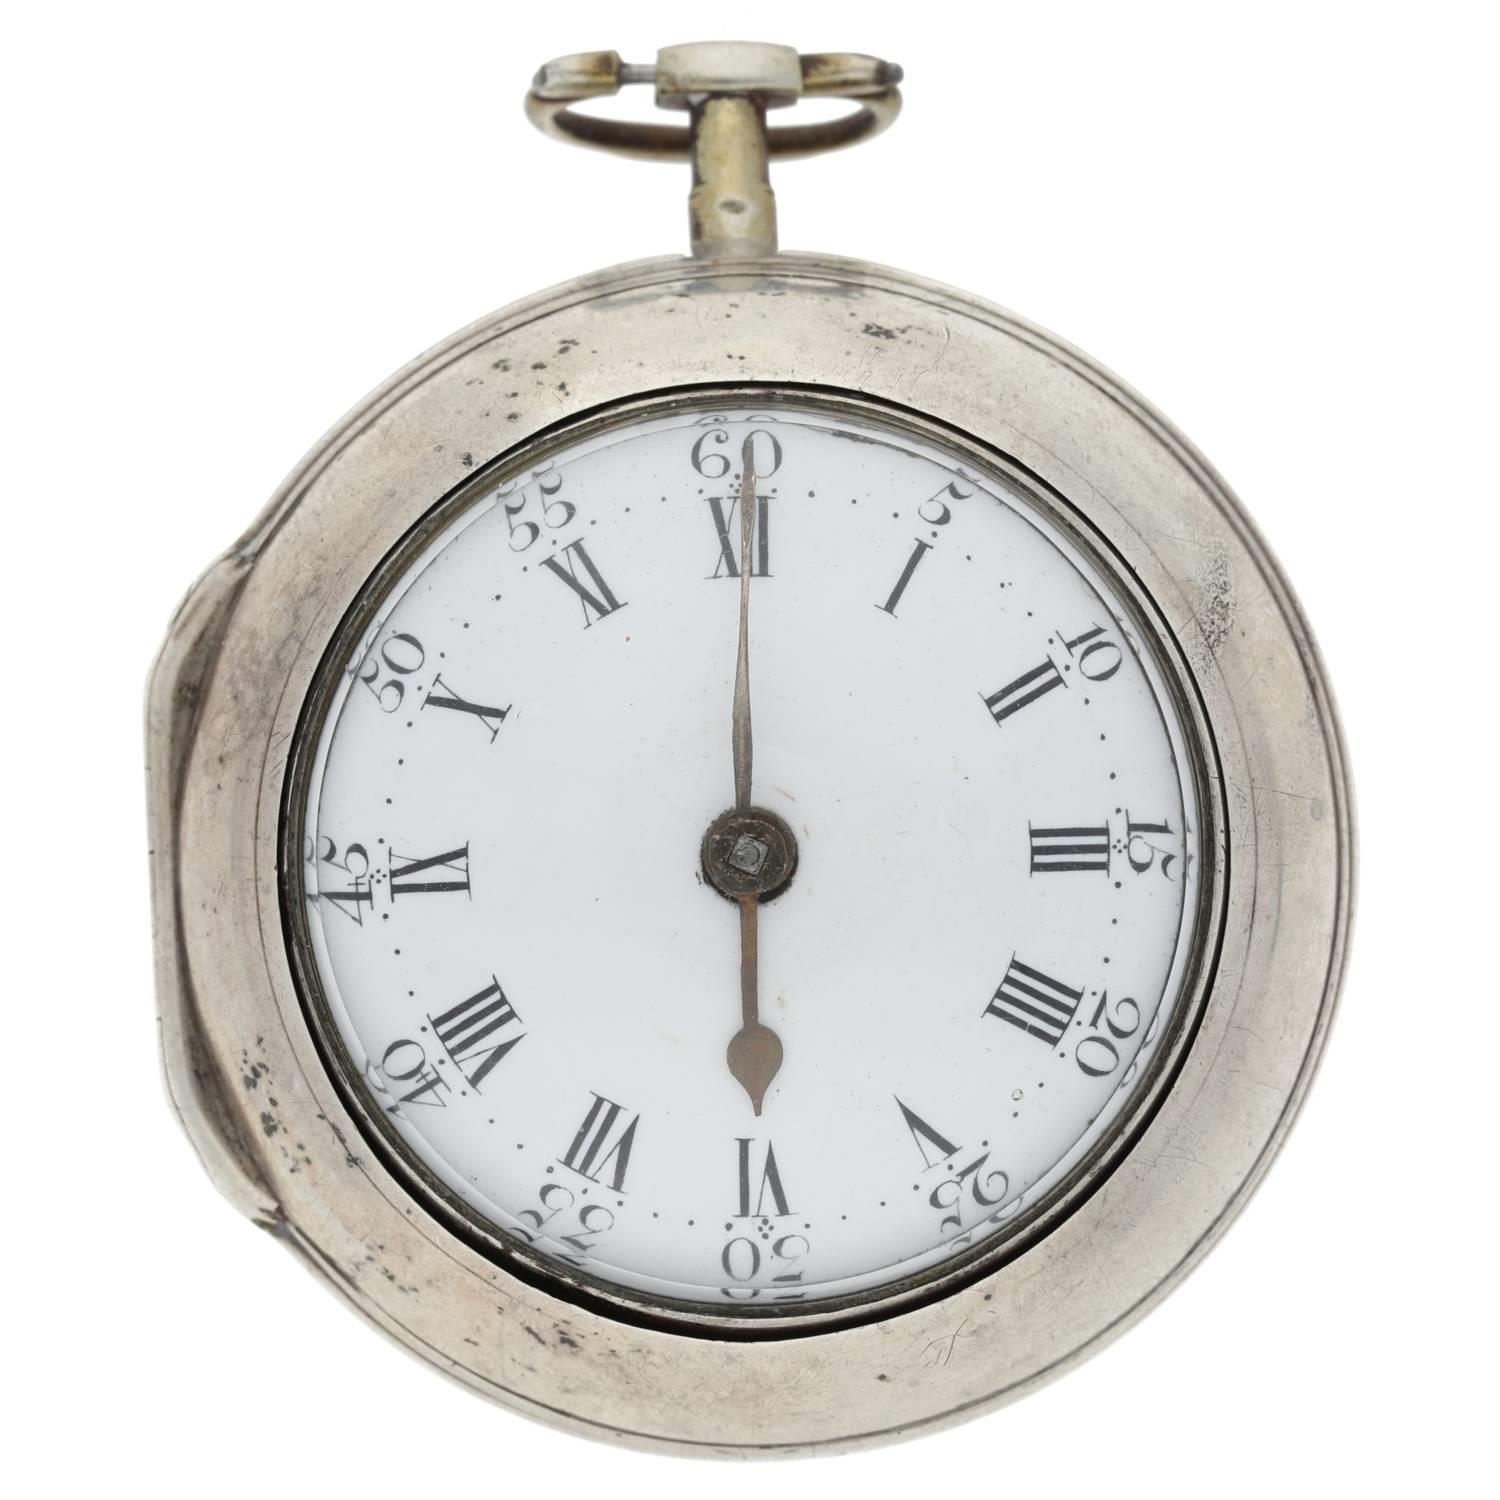 Jno. Lownt, Fecit - George III English silver pair cased verge pocket watch, London 1769, signed - Image 2 of 10